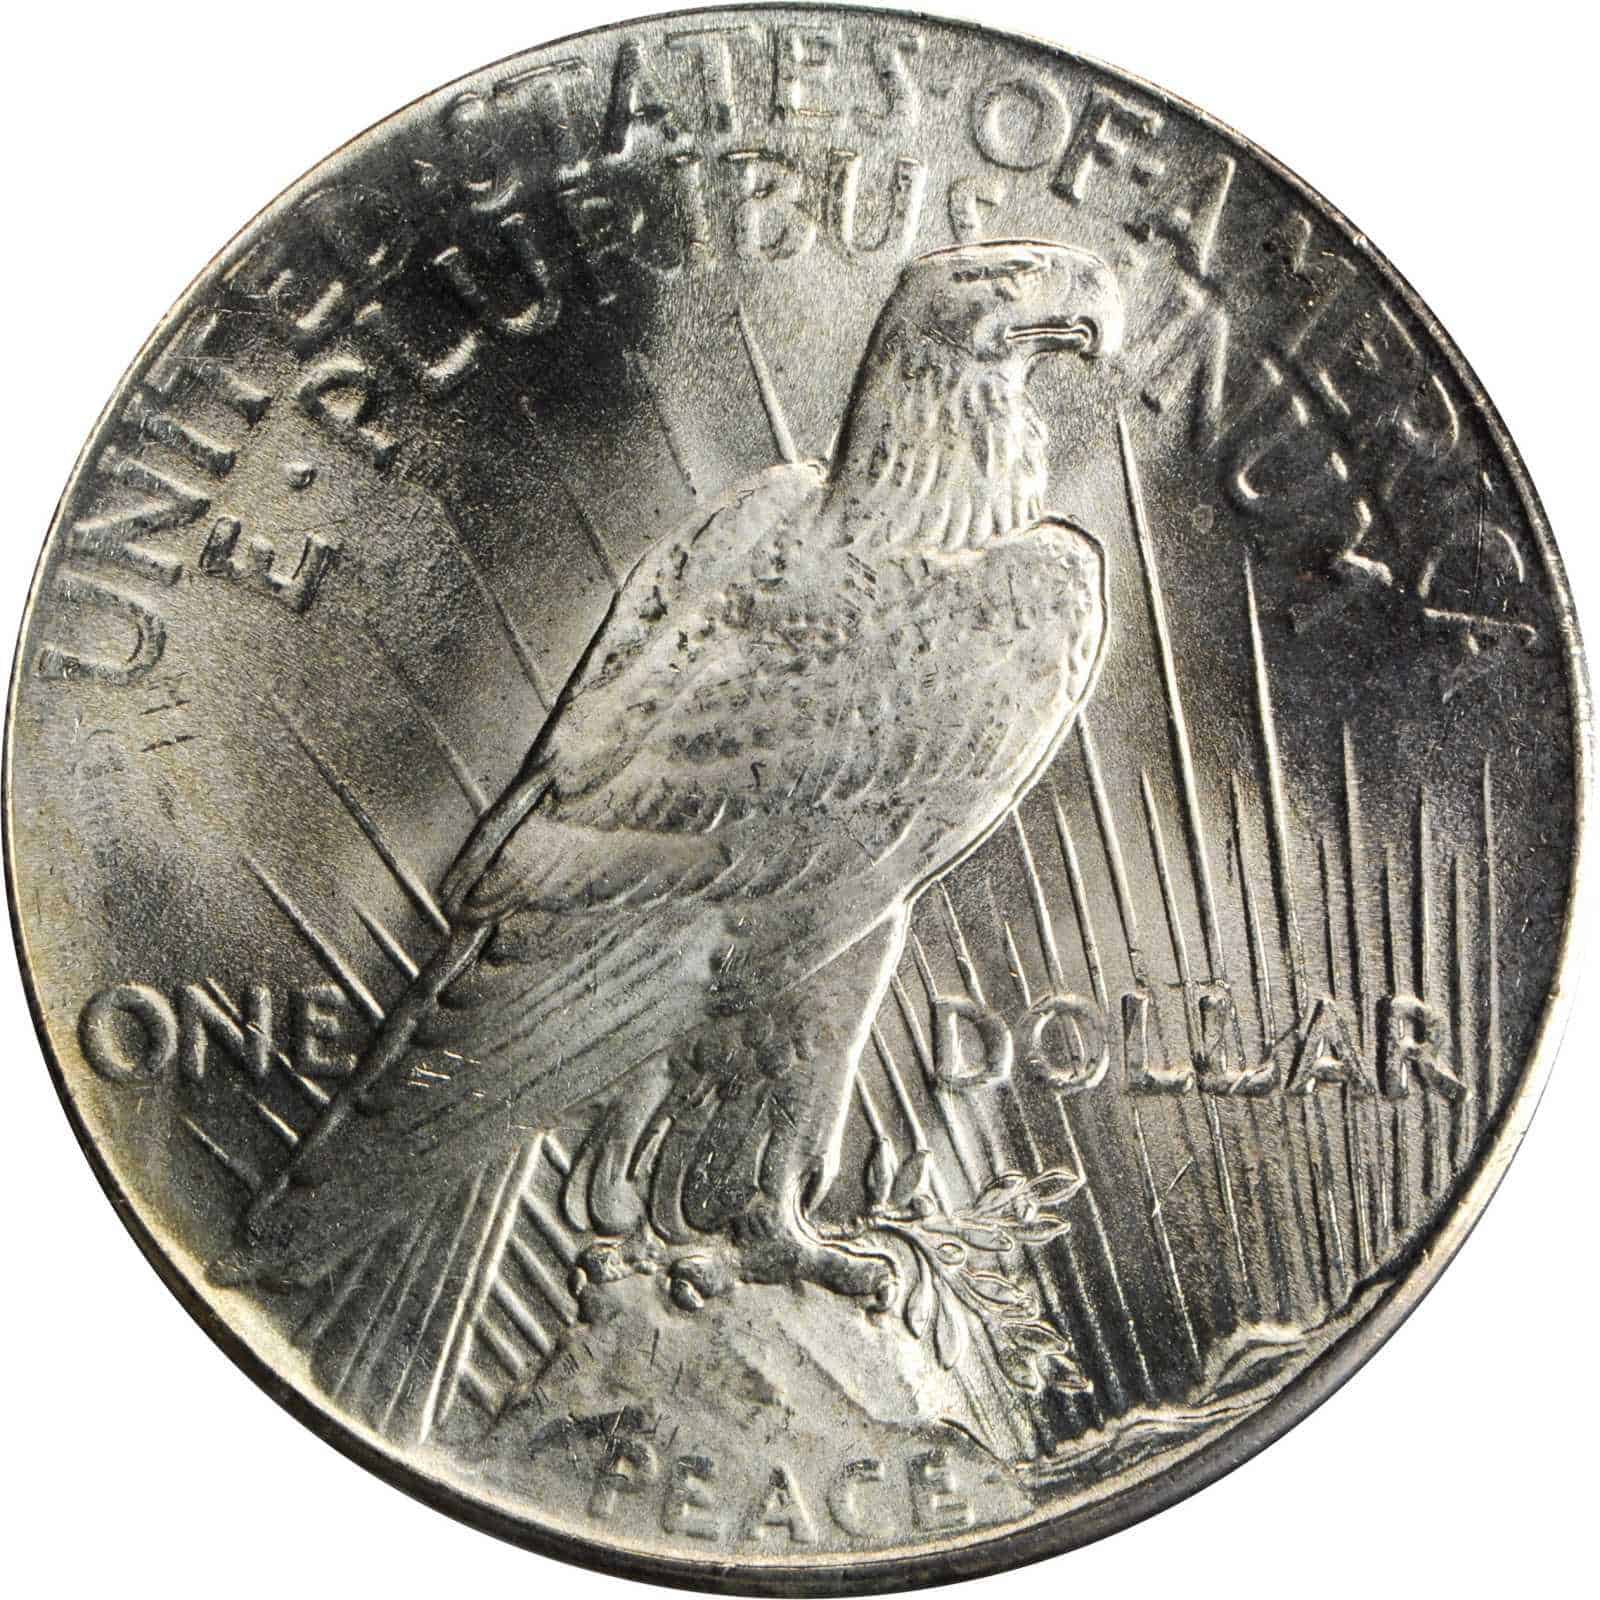 The Reverse of the 1925 Silver Dollar